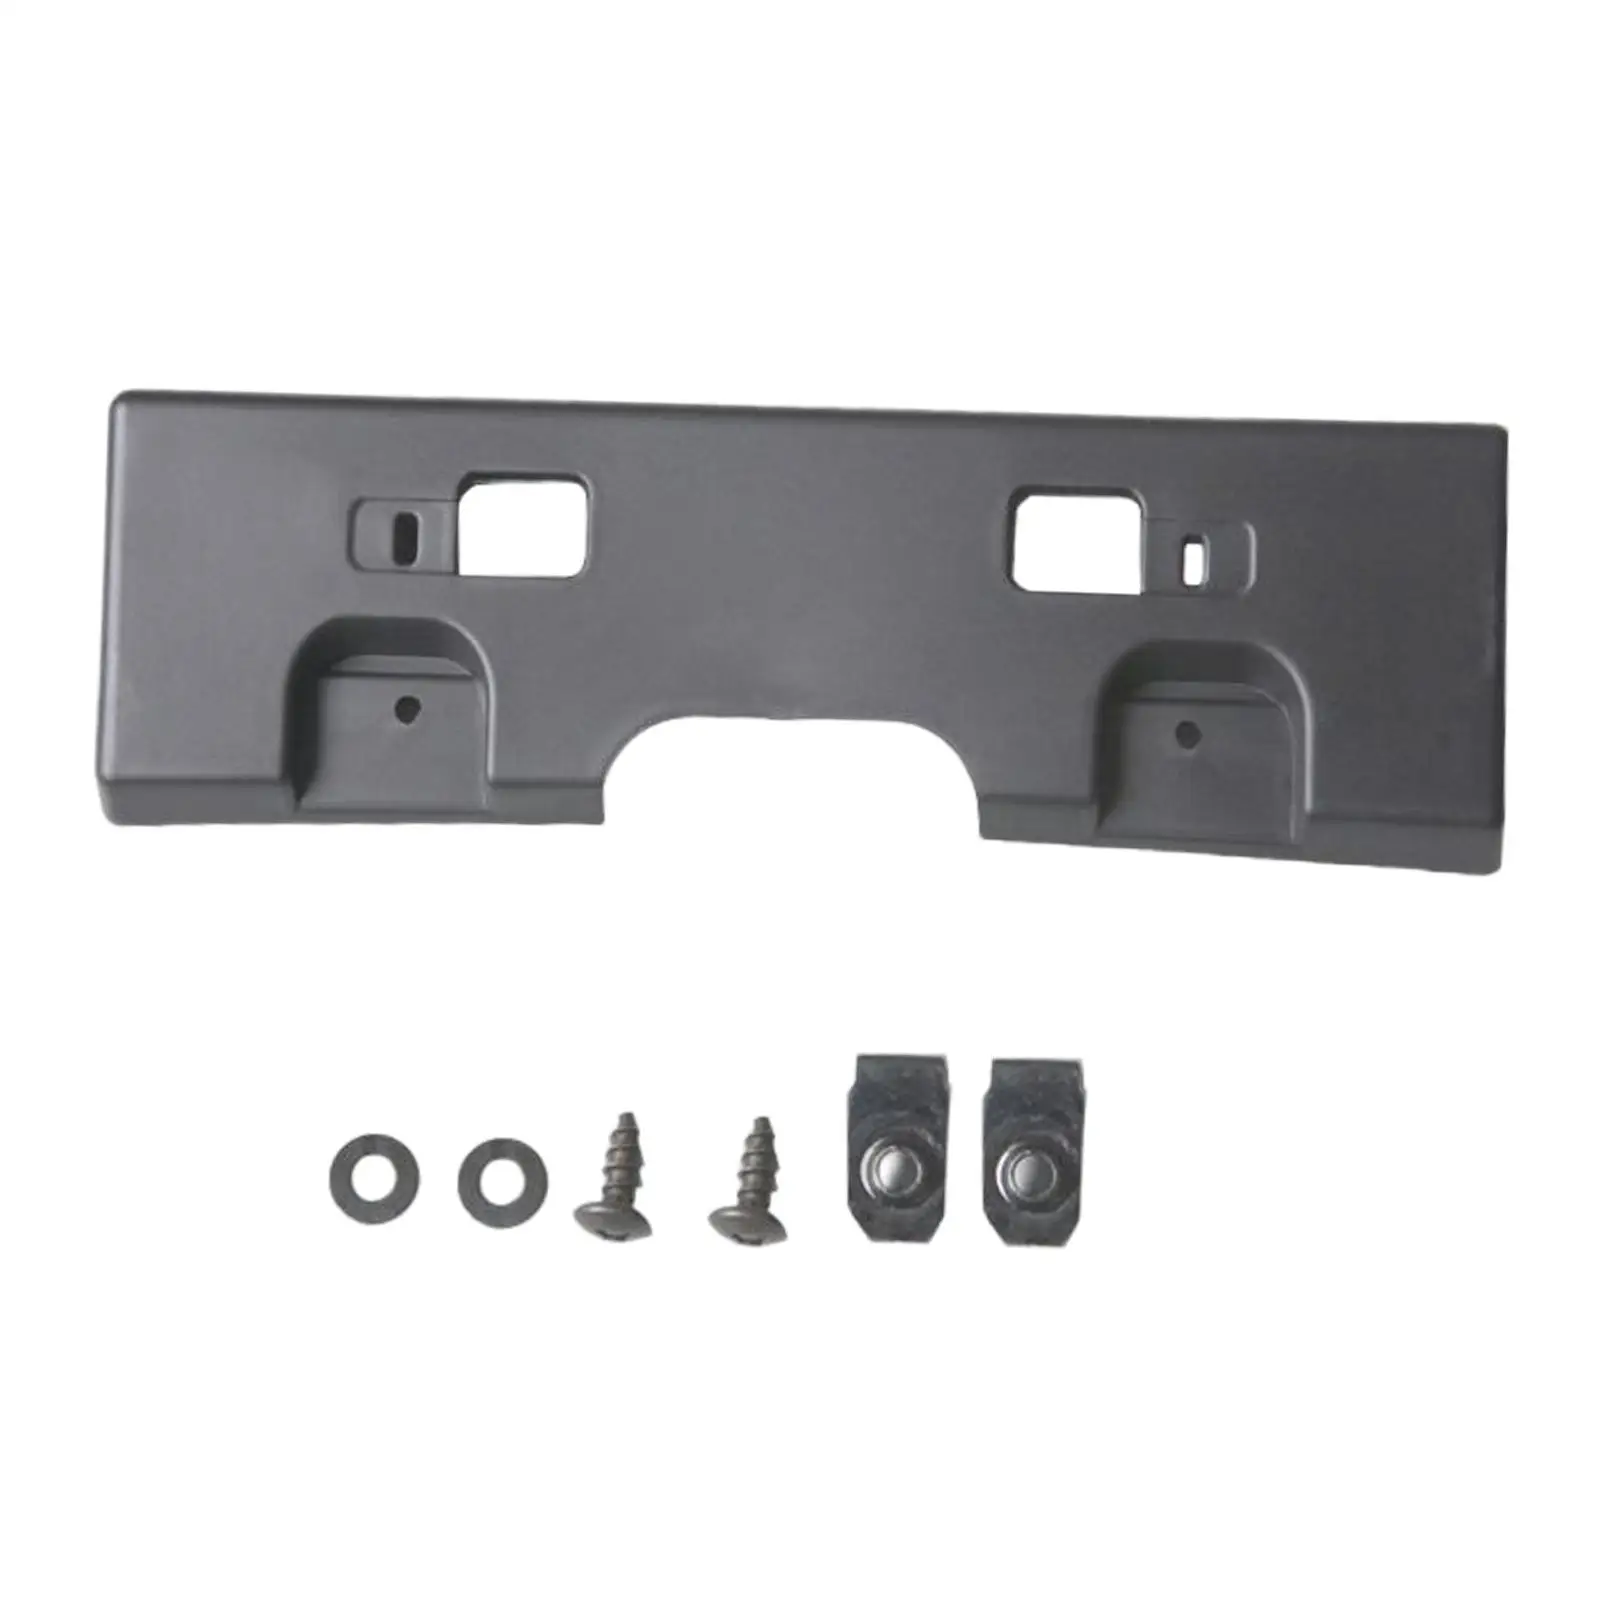 Front Bumper License Plate Bracket with HW Plastic License Tag Holder Fits for SENTRA 2007-12 847227091233 Car Supplies